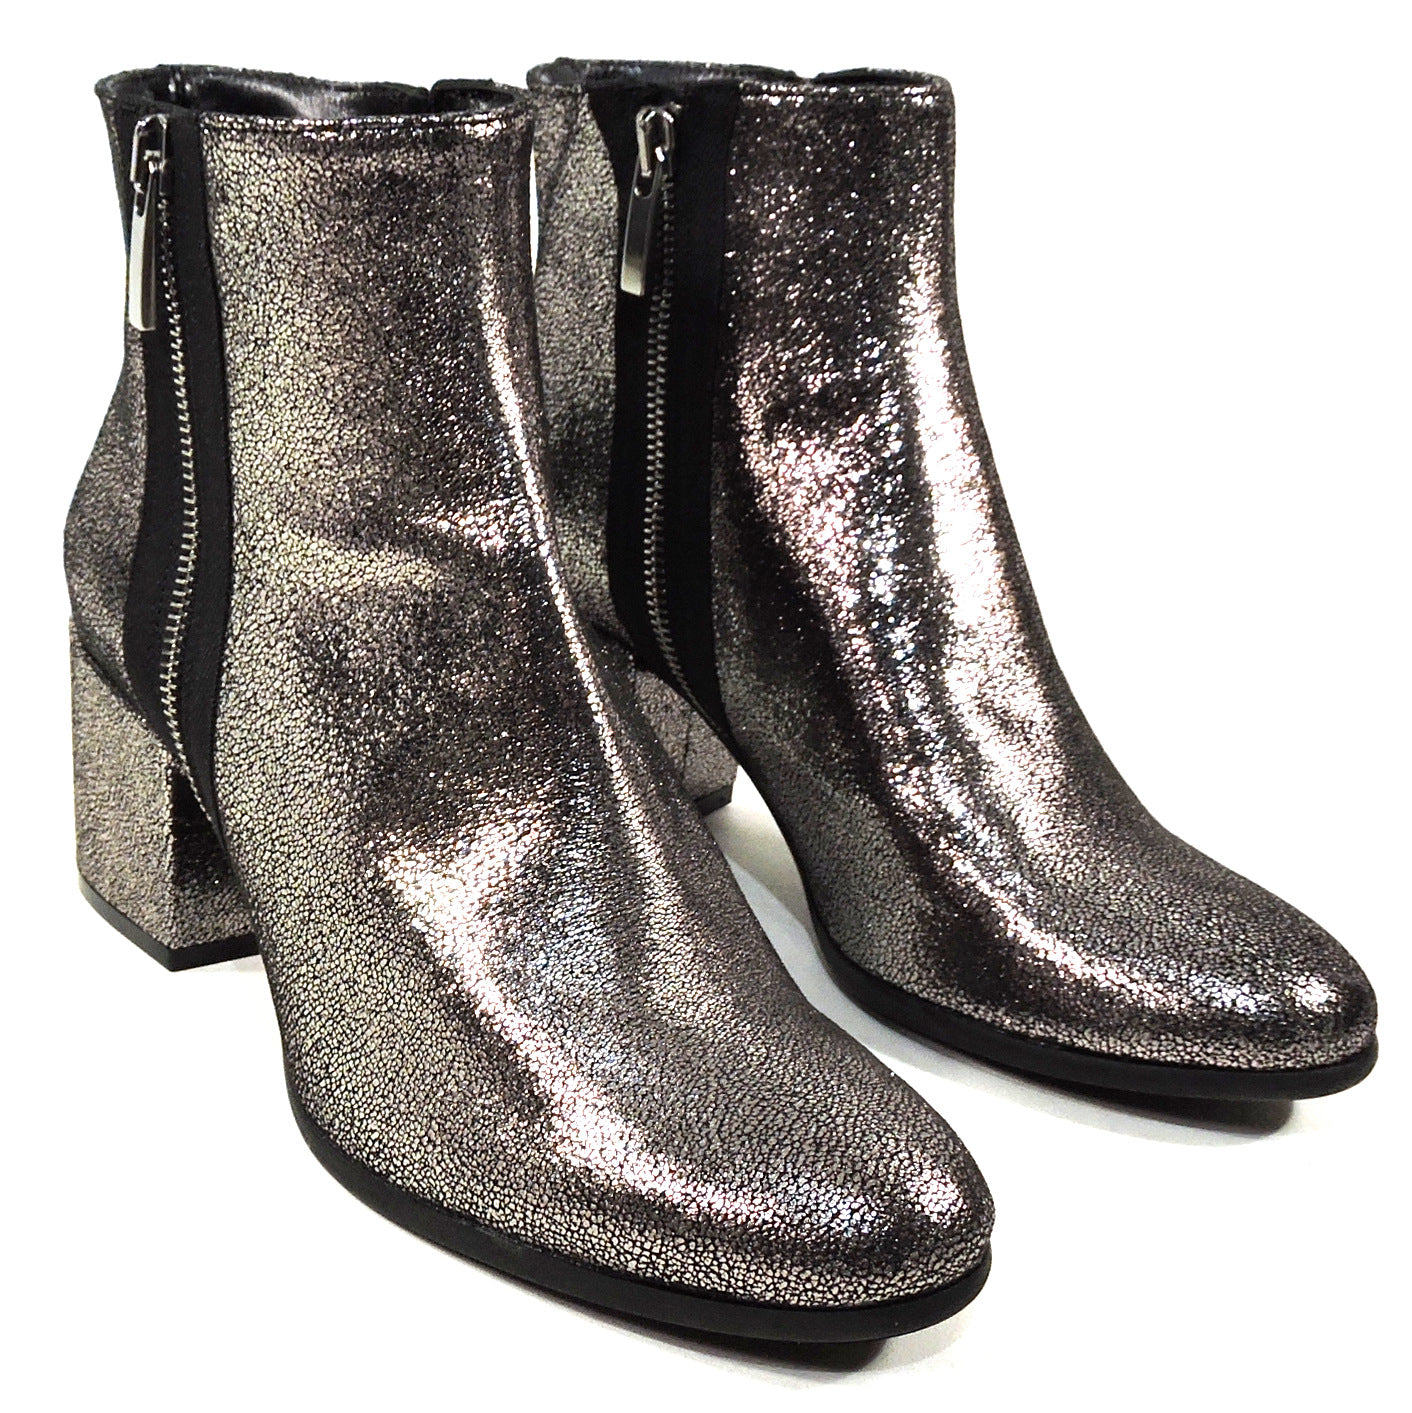 ROGANY 🇮🇹 WOMEN'S SILVER LEATHER COMFORT FASHION BOOTIE